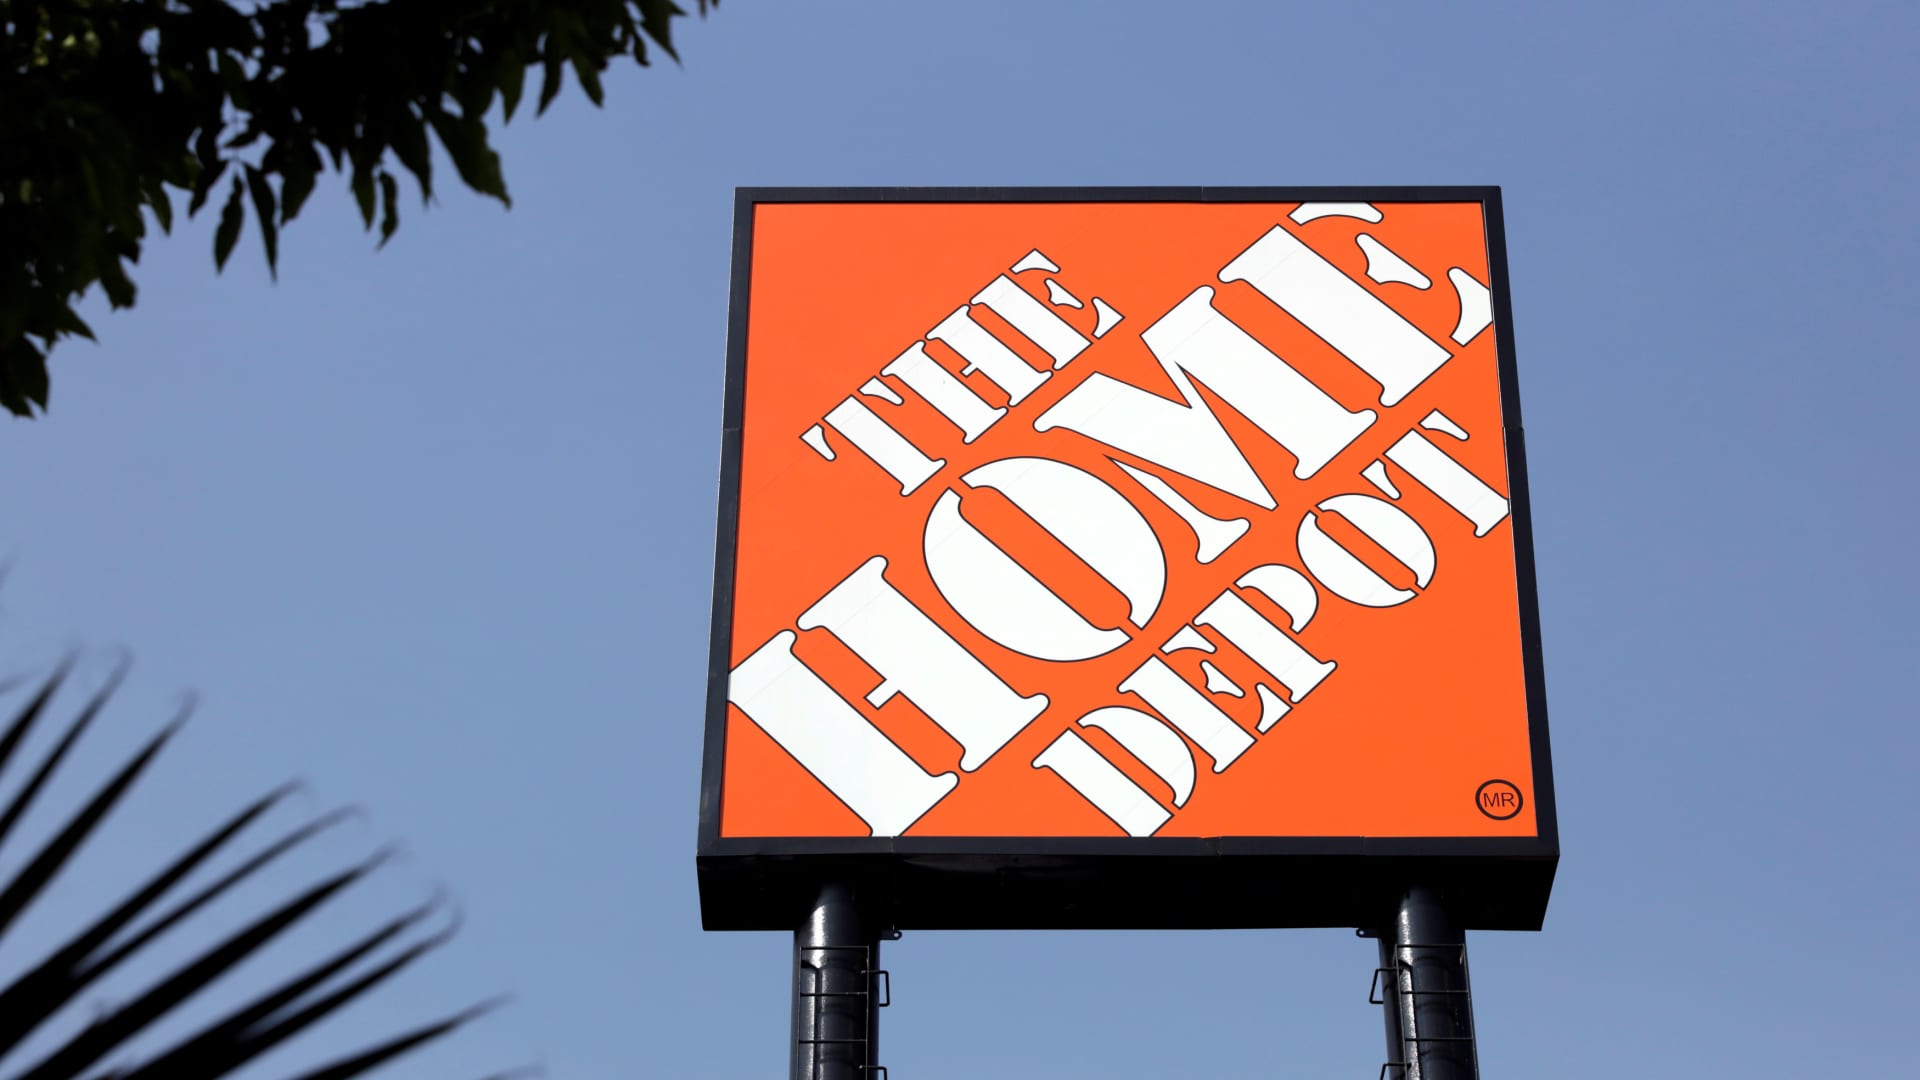 The logo of U.S. home improvement chain Home Depot is seen in Mexico City, Mexico, on Jan. 15, 2020.